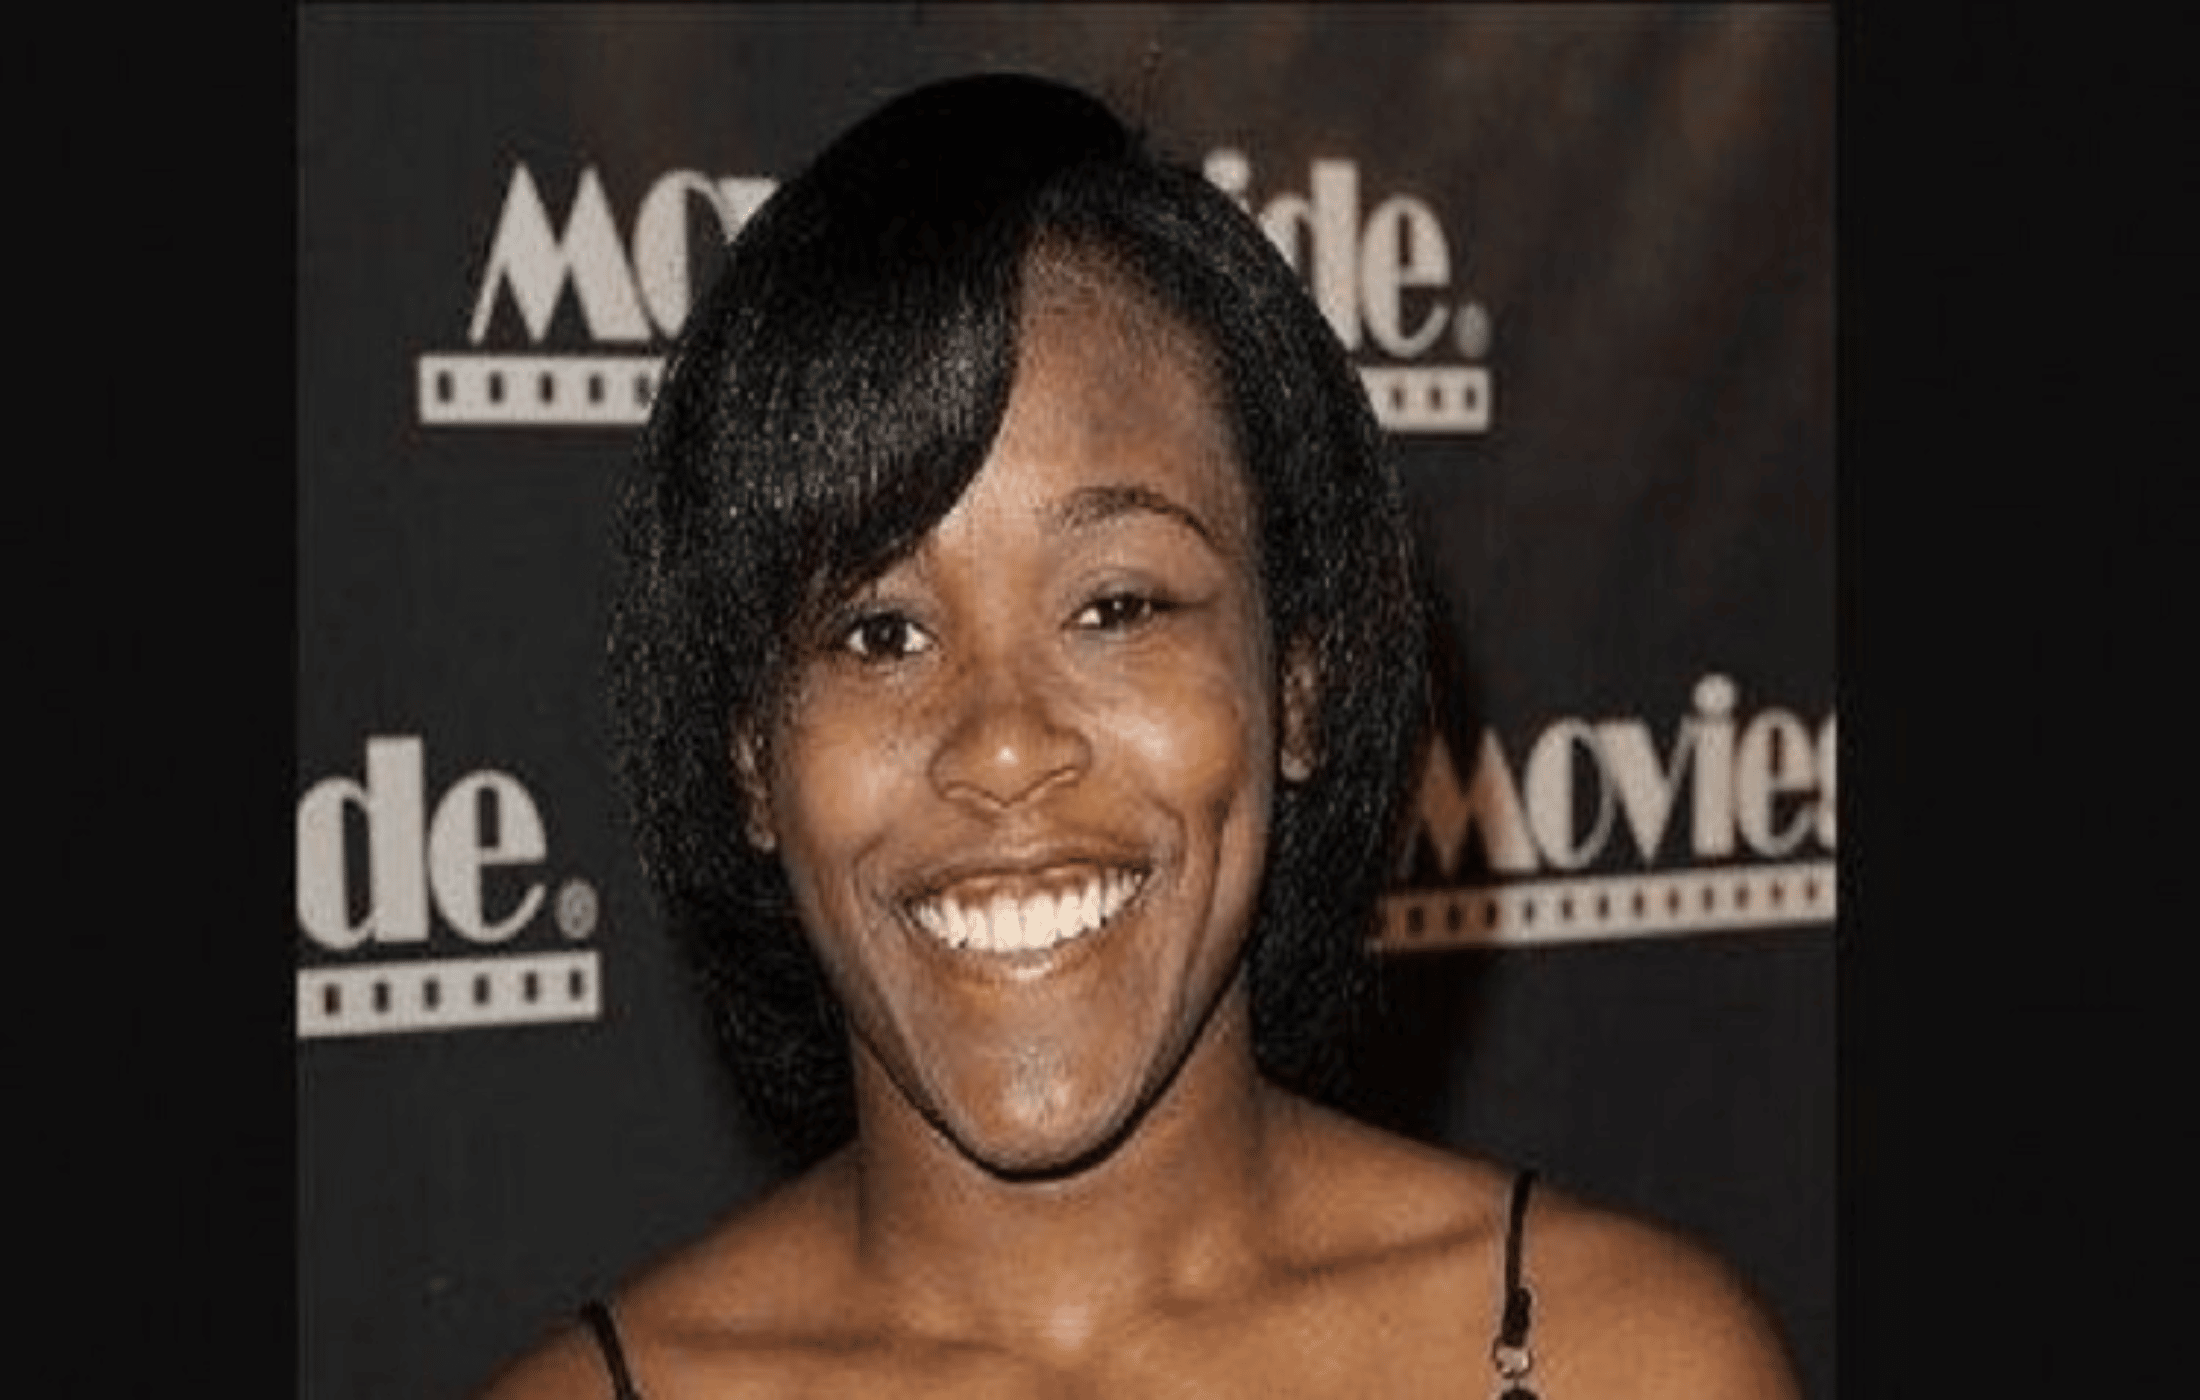 Jasmine Plummer age, net worth, wiki, family, biography and latest